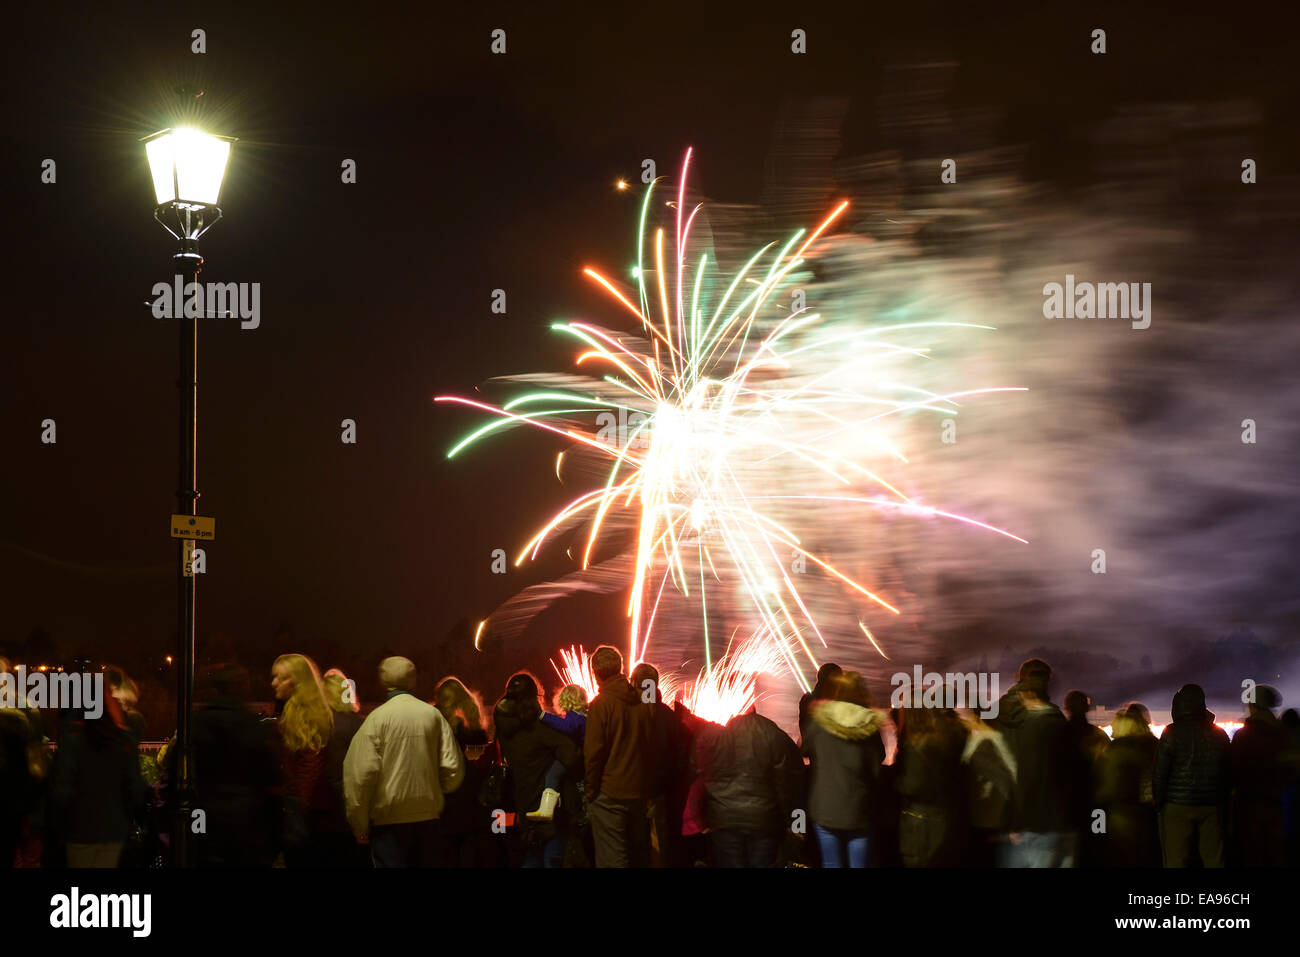 Crowds enjoy a November 5th fireworks display in Chester city centre UK Stock Photo